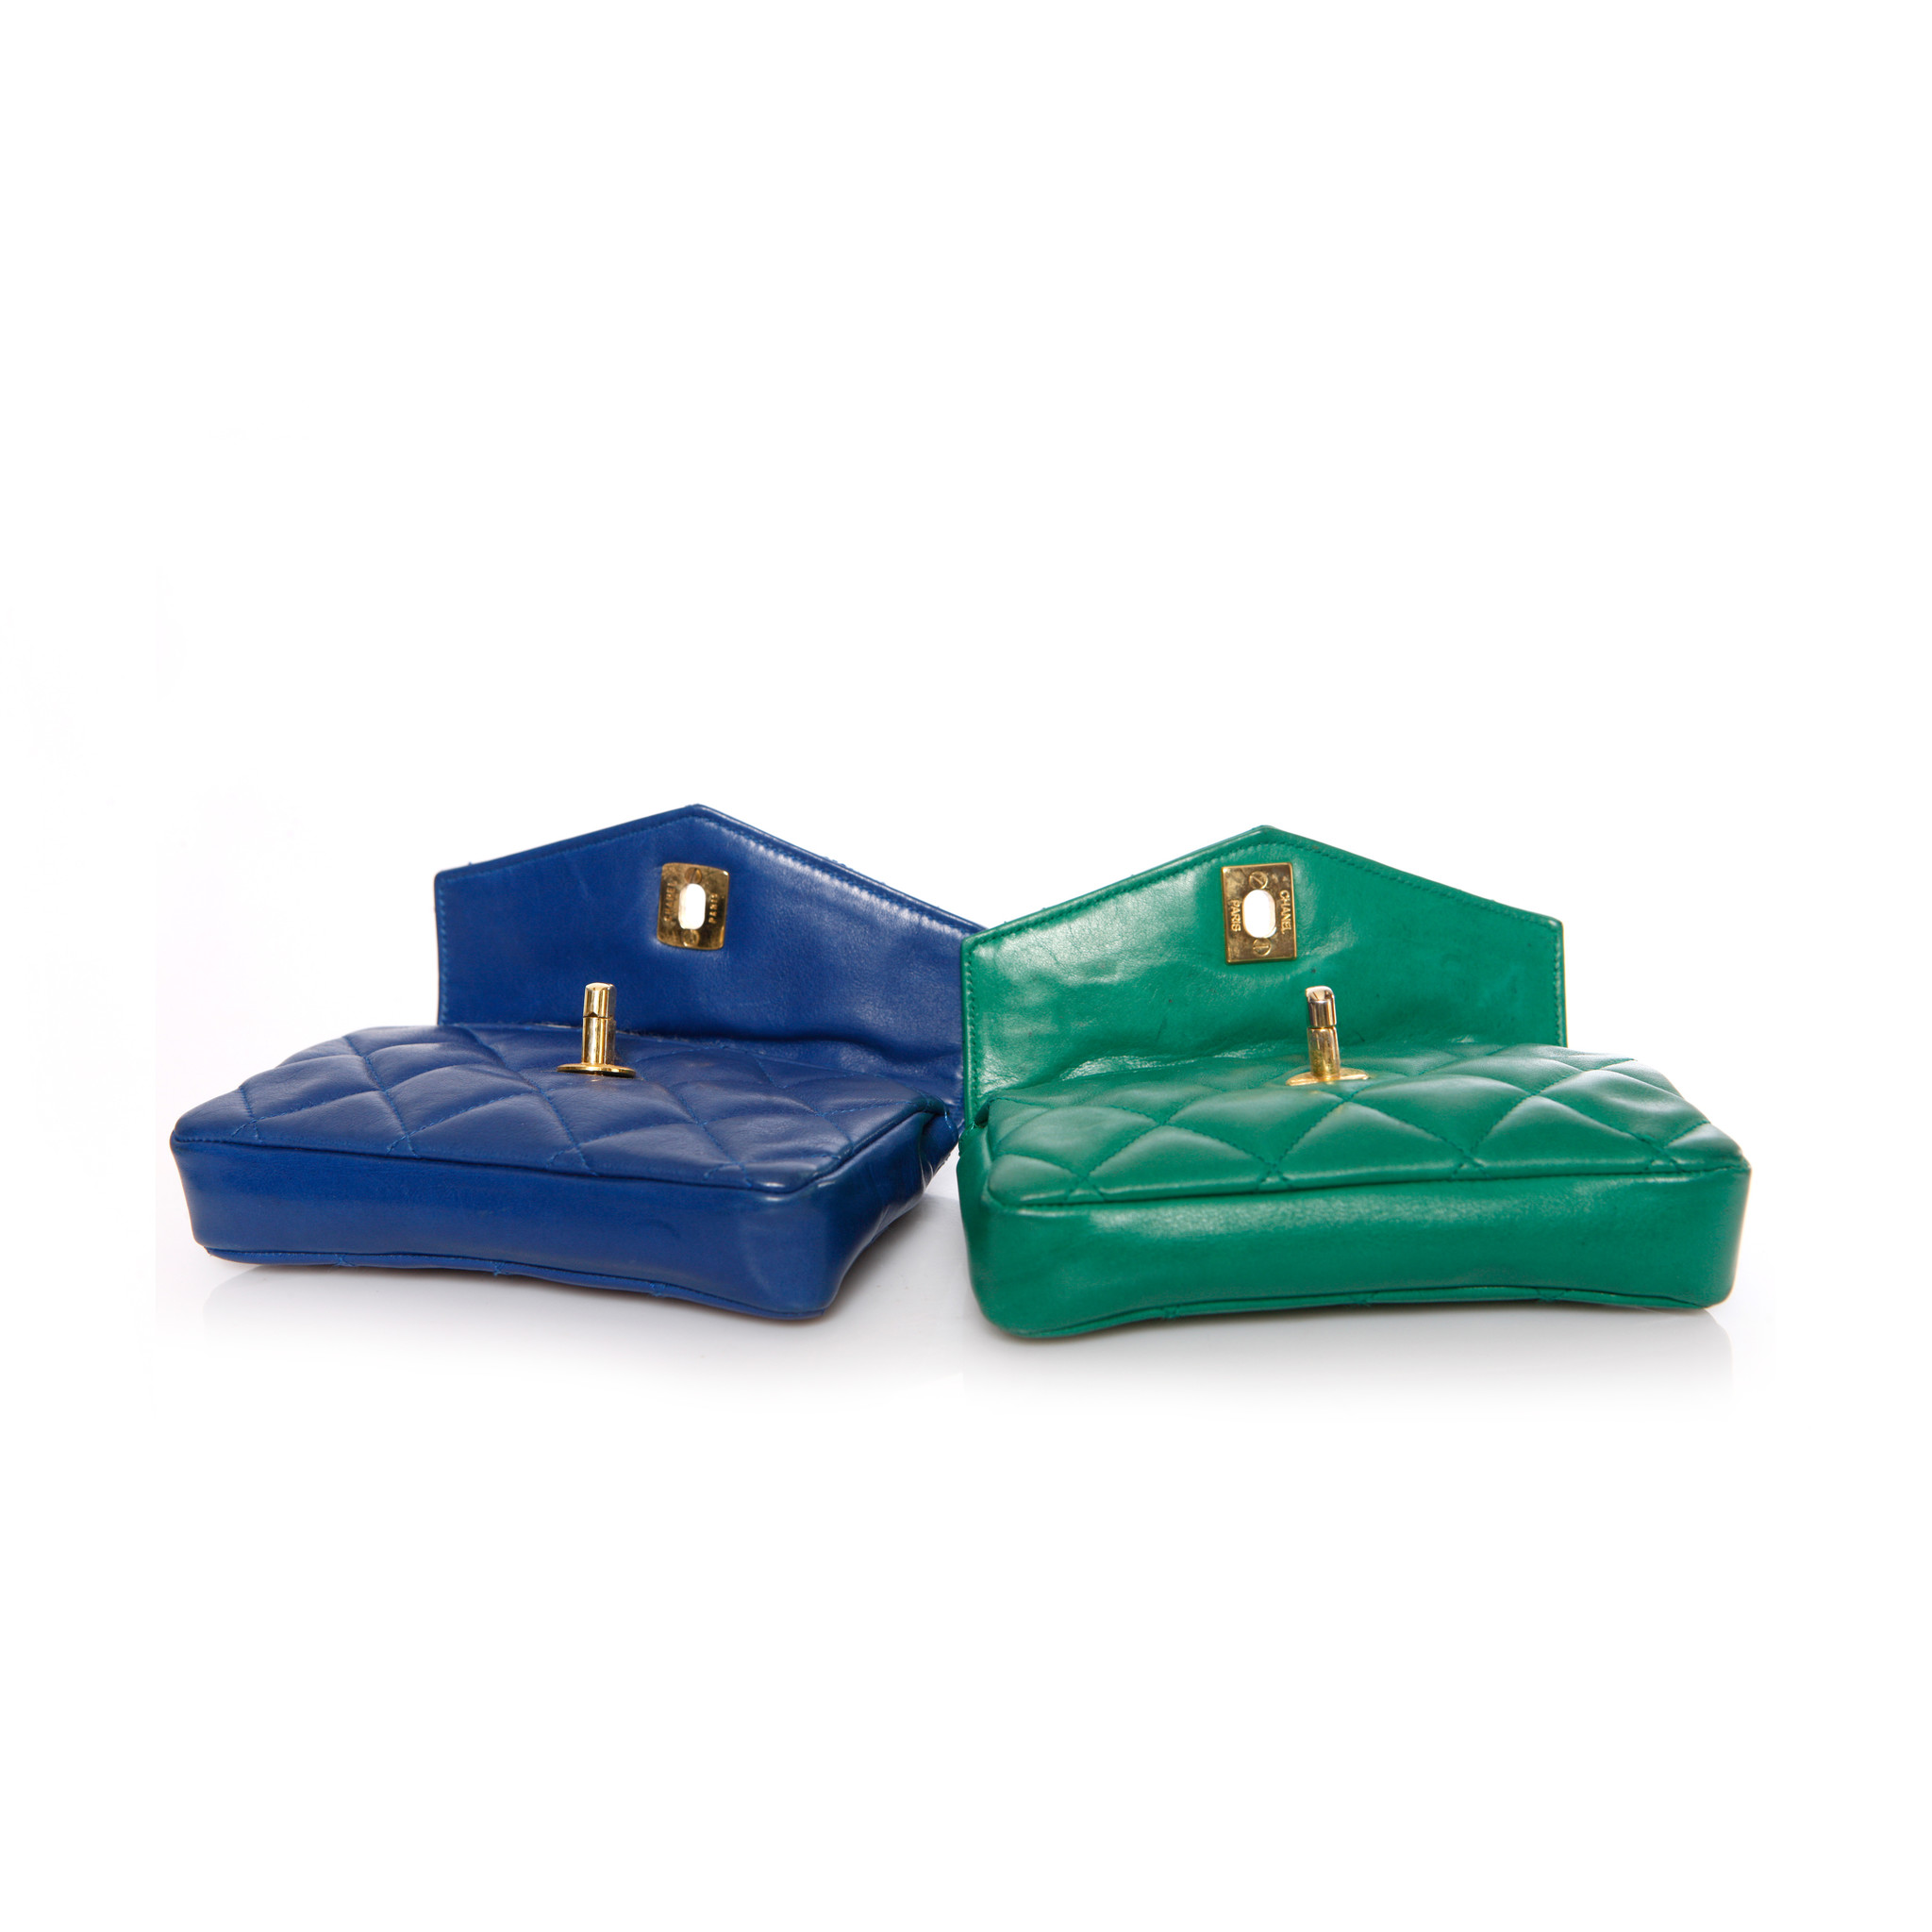 Chanel, Leather belt bag in red/blue/green with gold hardware